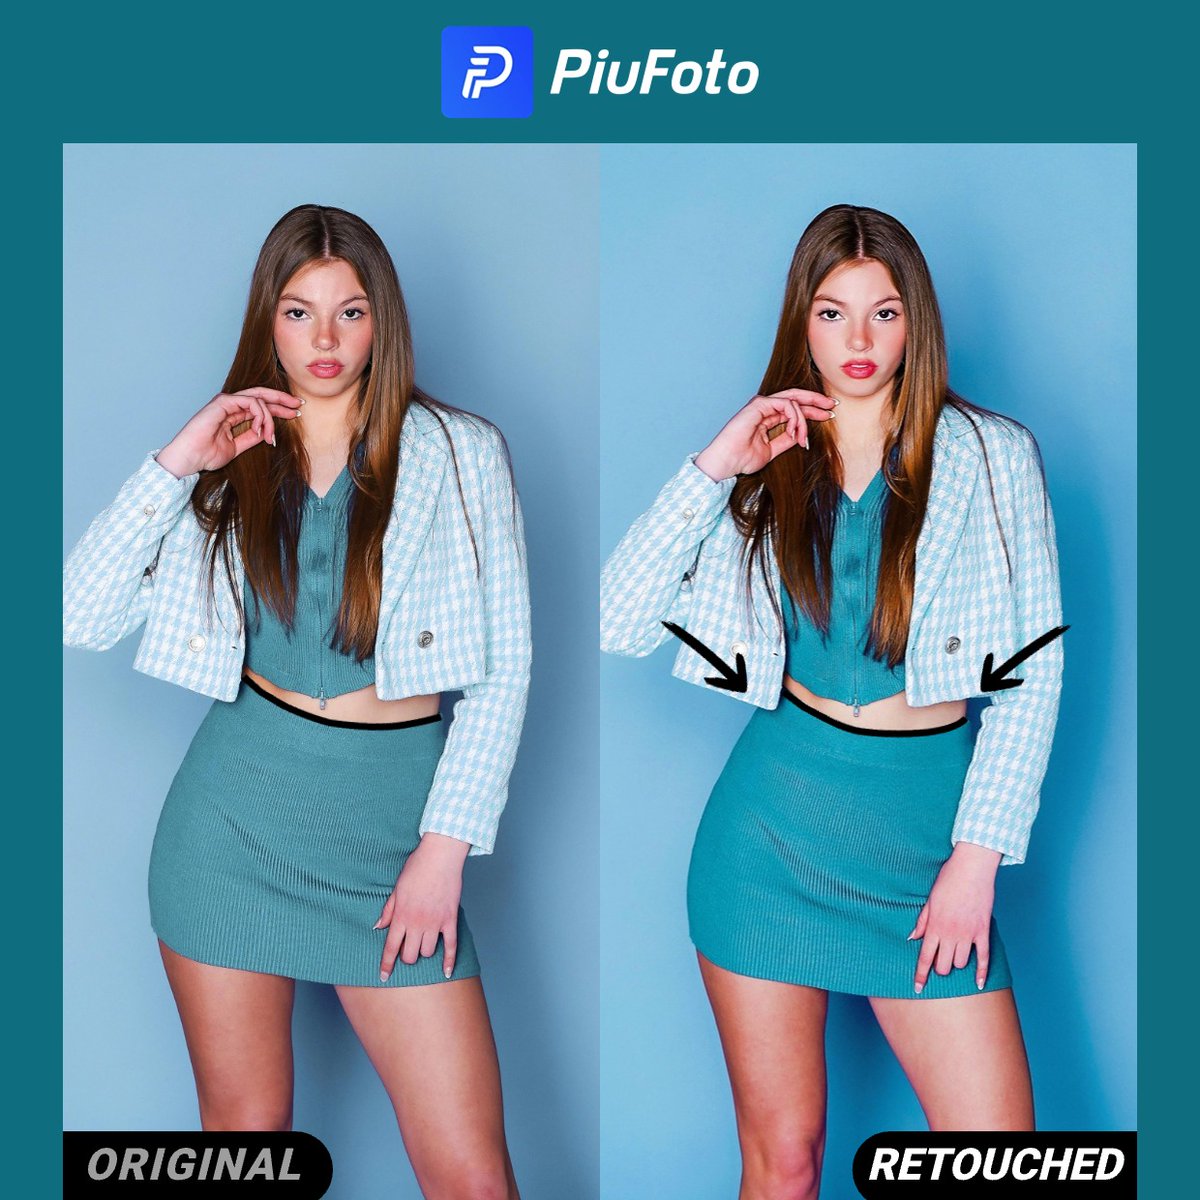 📷One-click batch slimming of legs, Piufoto gives your photos a perfect figure#Piufoto #InstagramInnovations #AIEditing #PicturePerfect #LiveStreaming #CloudStorage #InfluencerEssentials